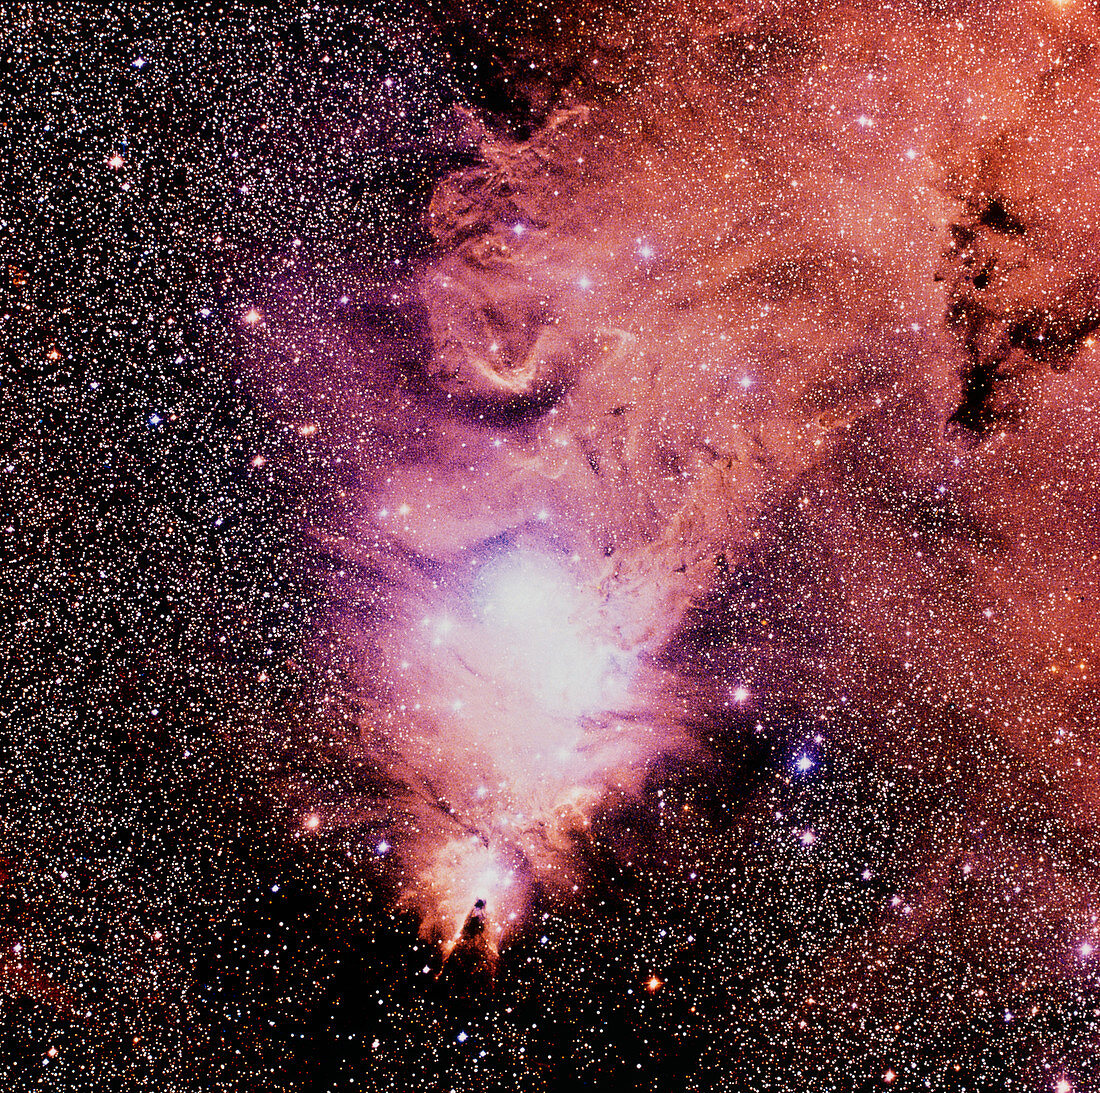 Optical image of the Cone nebula in Monoceros